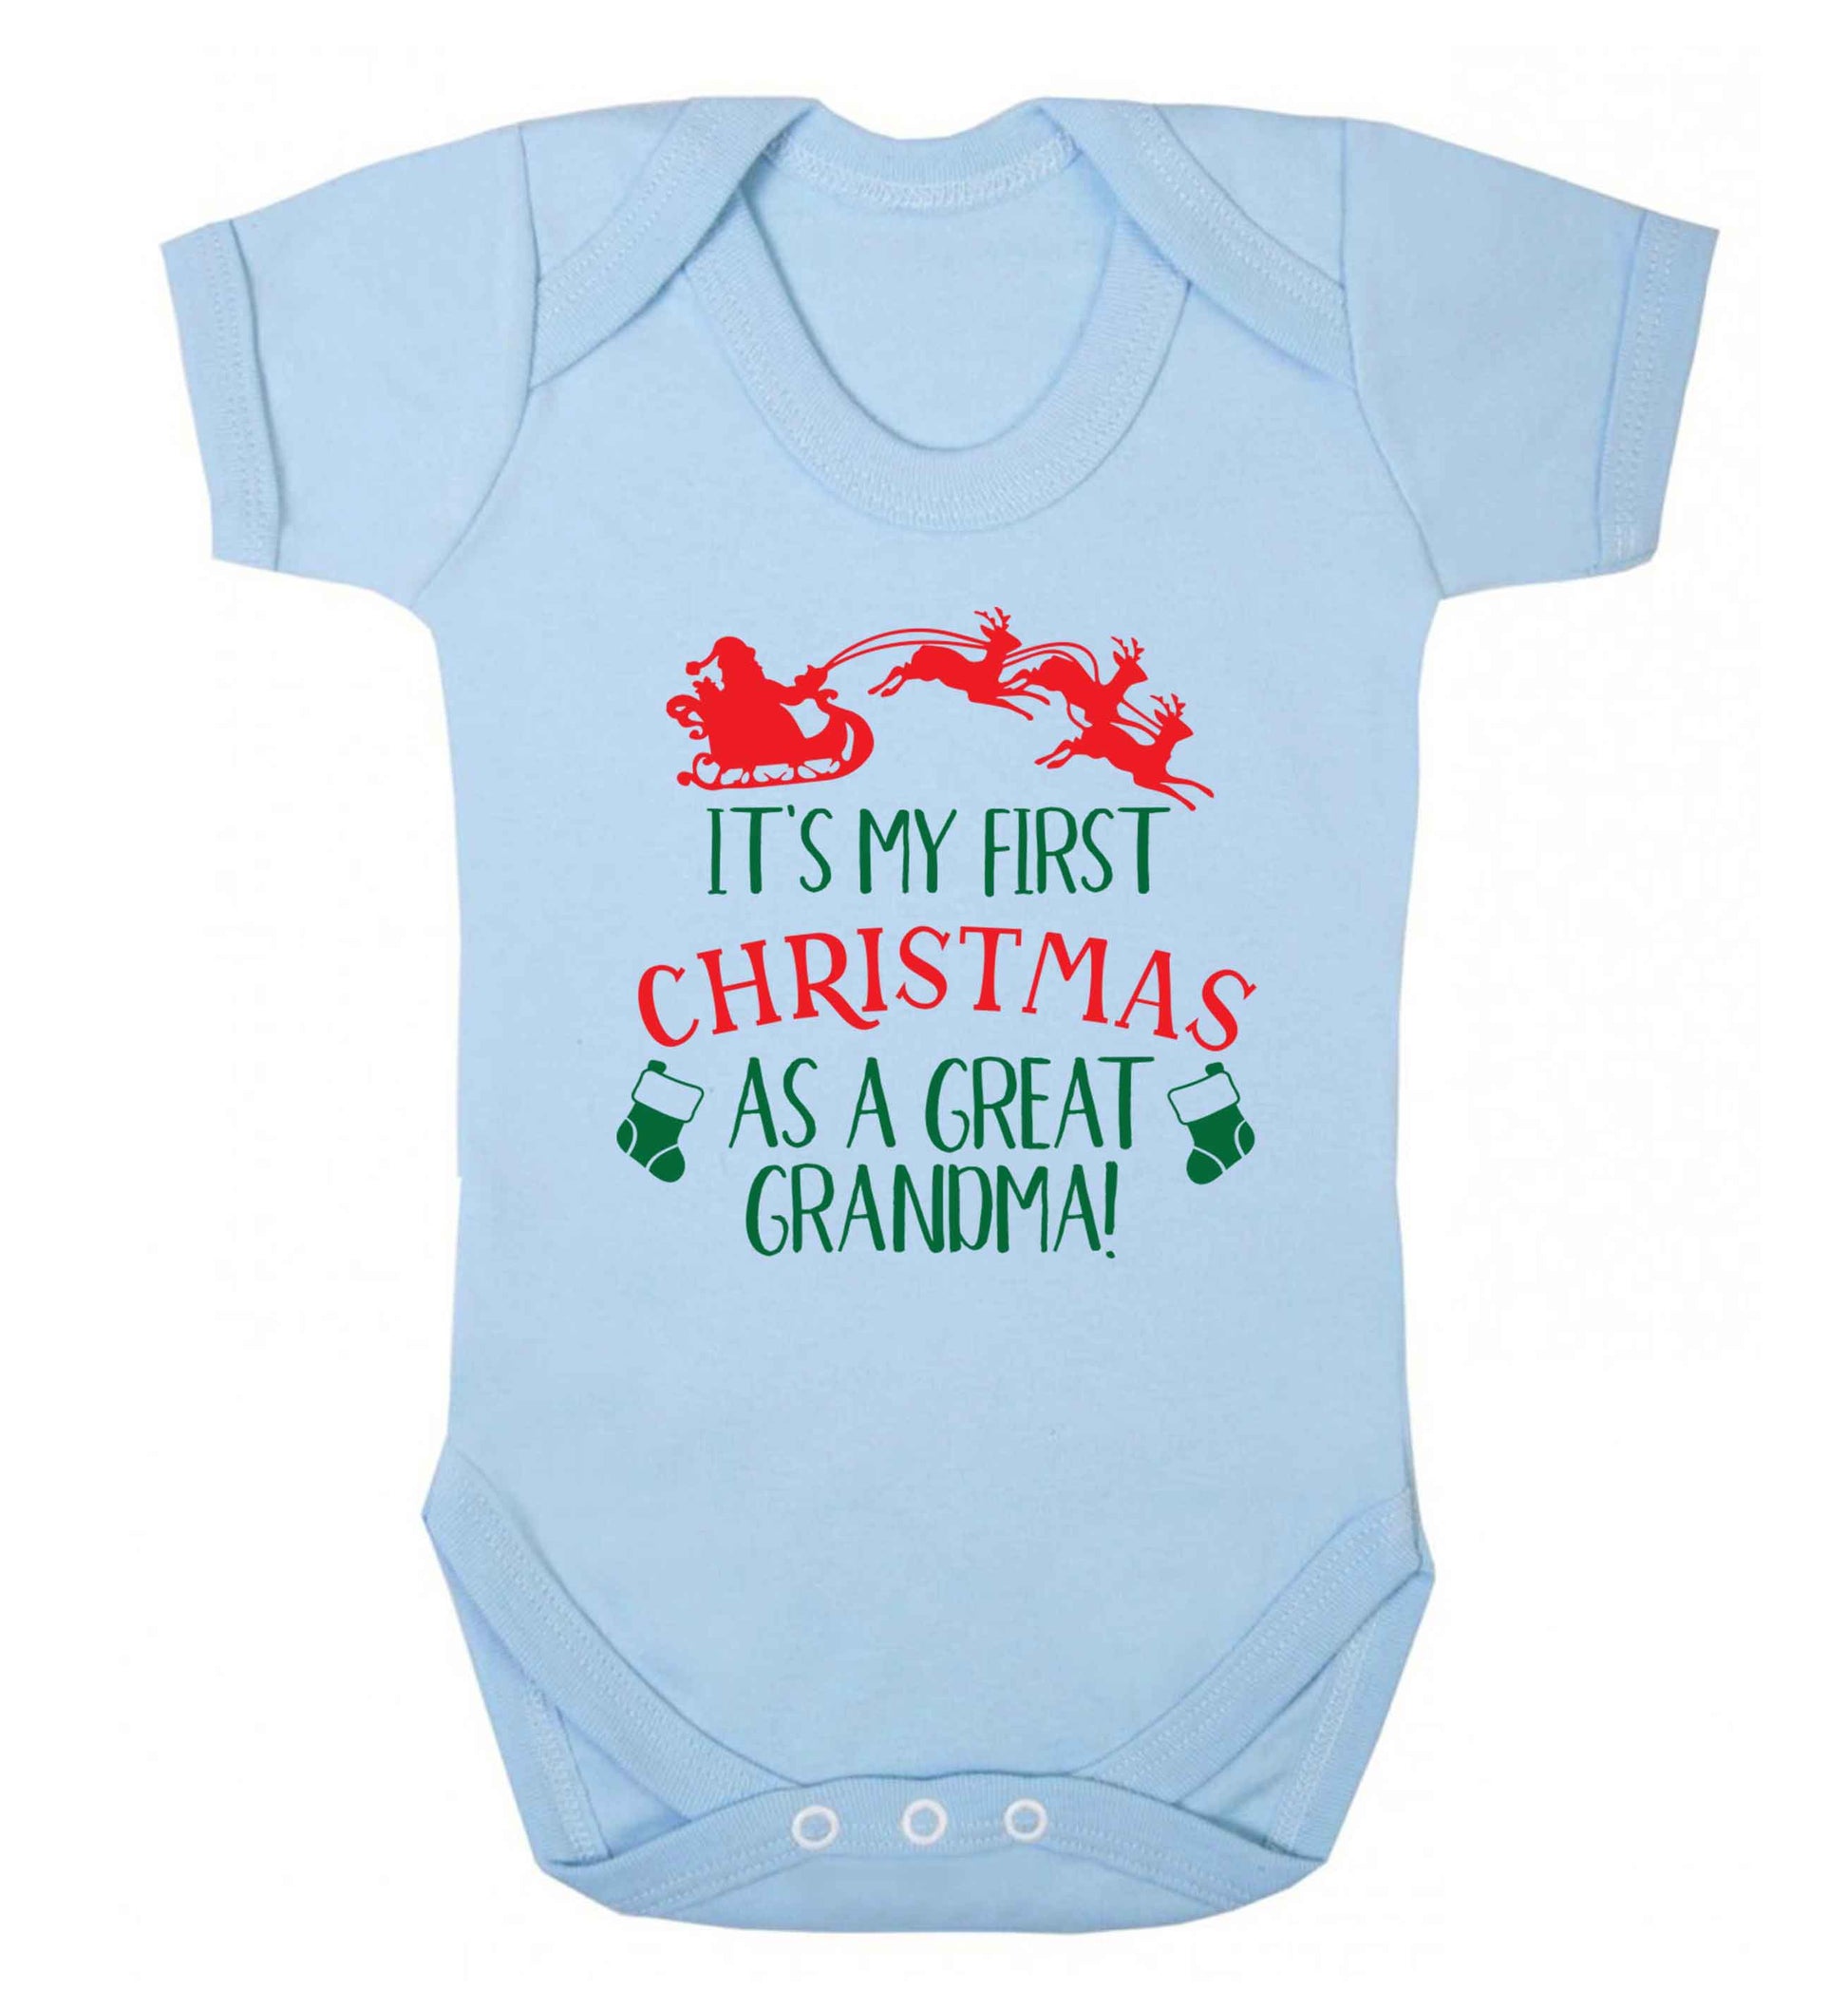 It's my first Christmas as a great grandma! Baby Vest pale blue 18-24 months